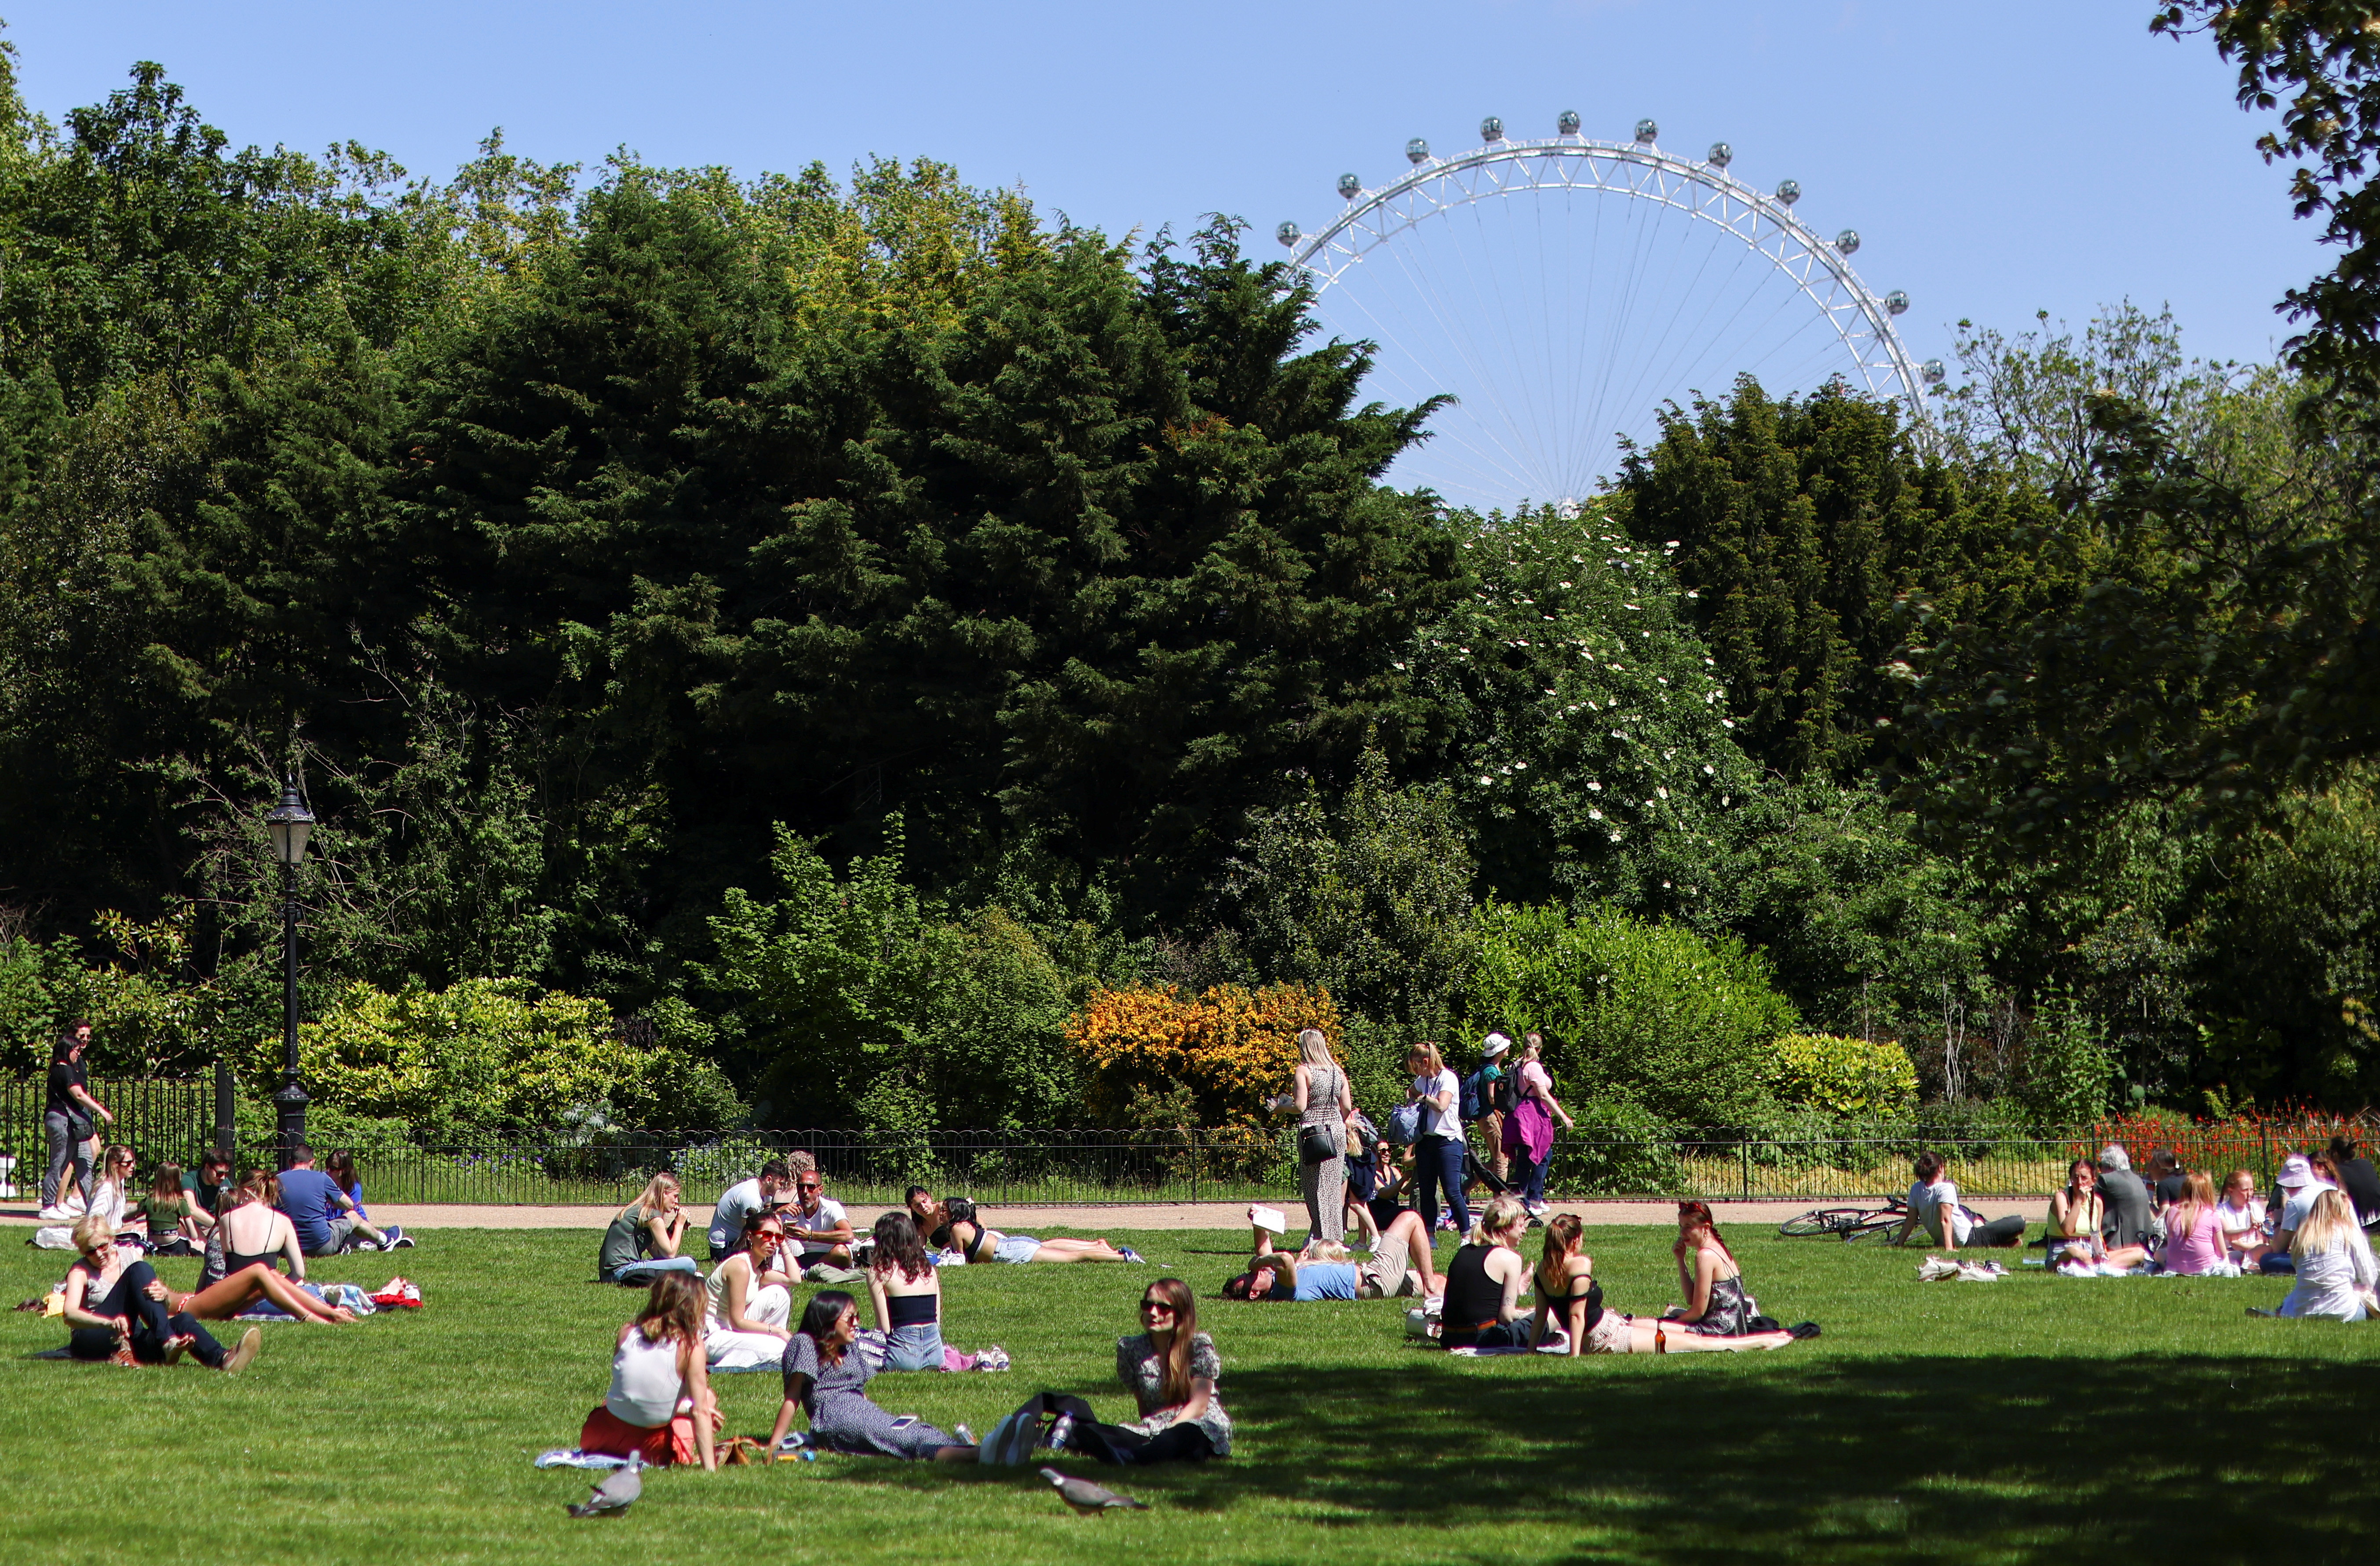 People enjoy the sunny weather in London